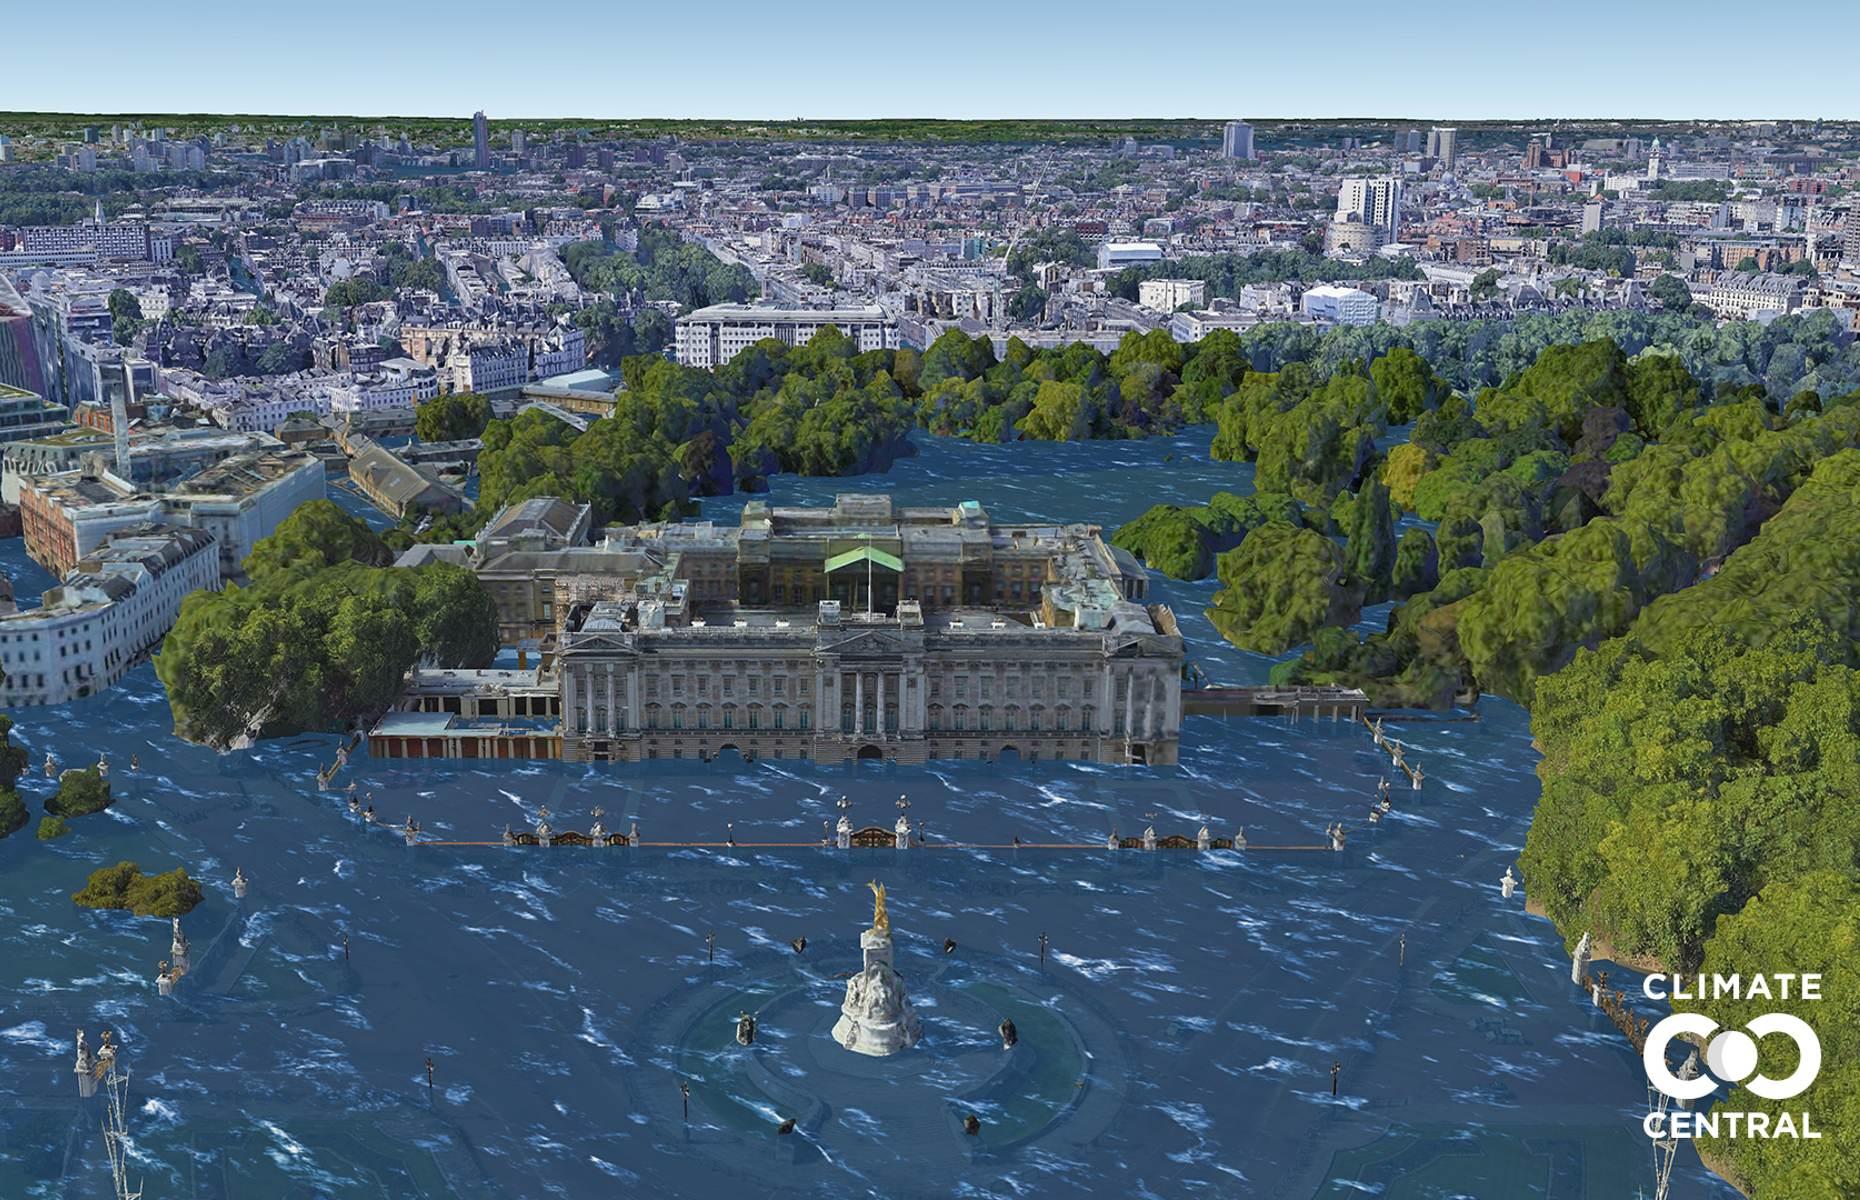 The British royals’ official residence since 1837, Buckingham Palace in London, England would fare badly in the event of 3°C (5.4°F) of warming, due in part to its proximity to the River Thames. Its surrounding grounds would be submerged in water, as would the lower levels of the palace itself, according to imaging from Climate Central.